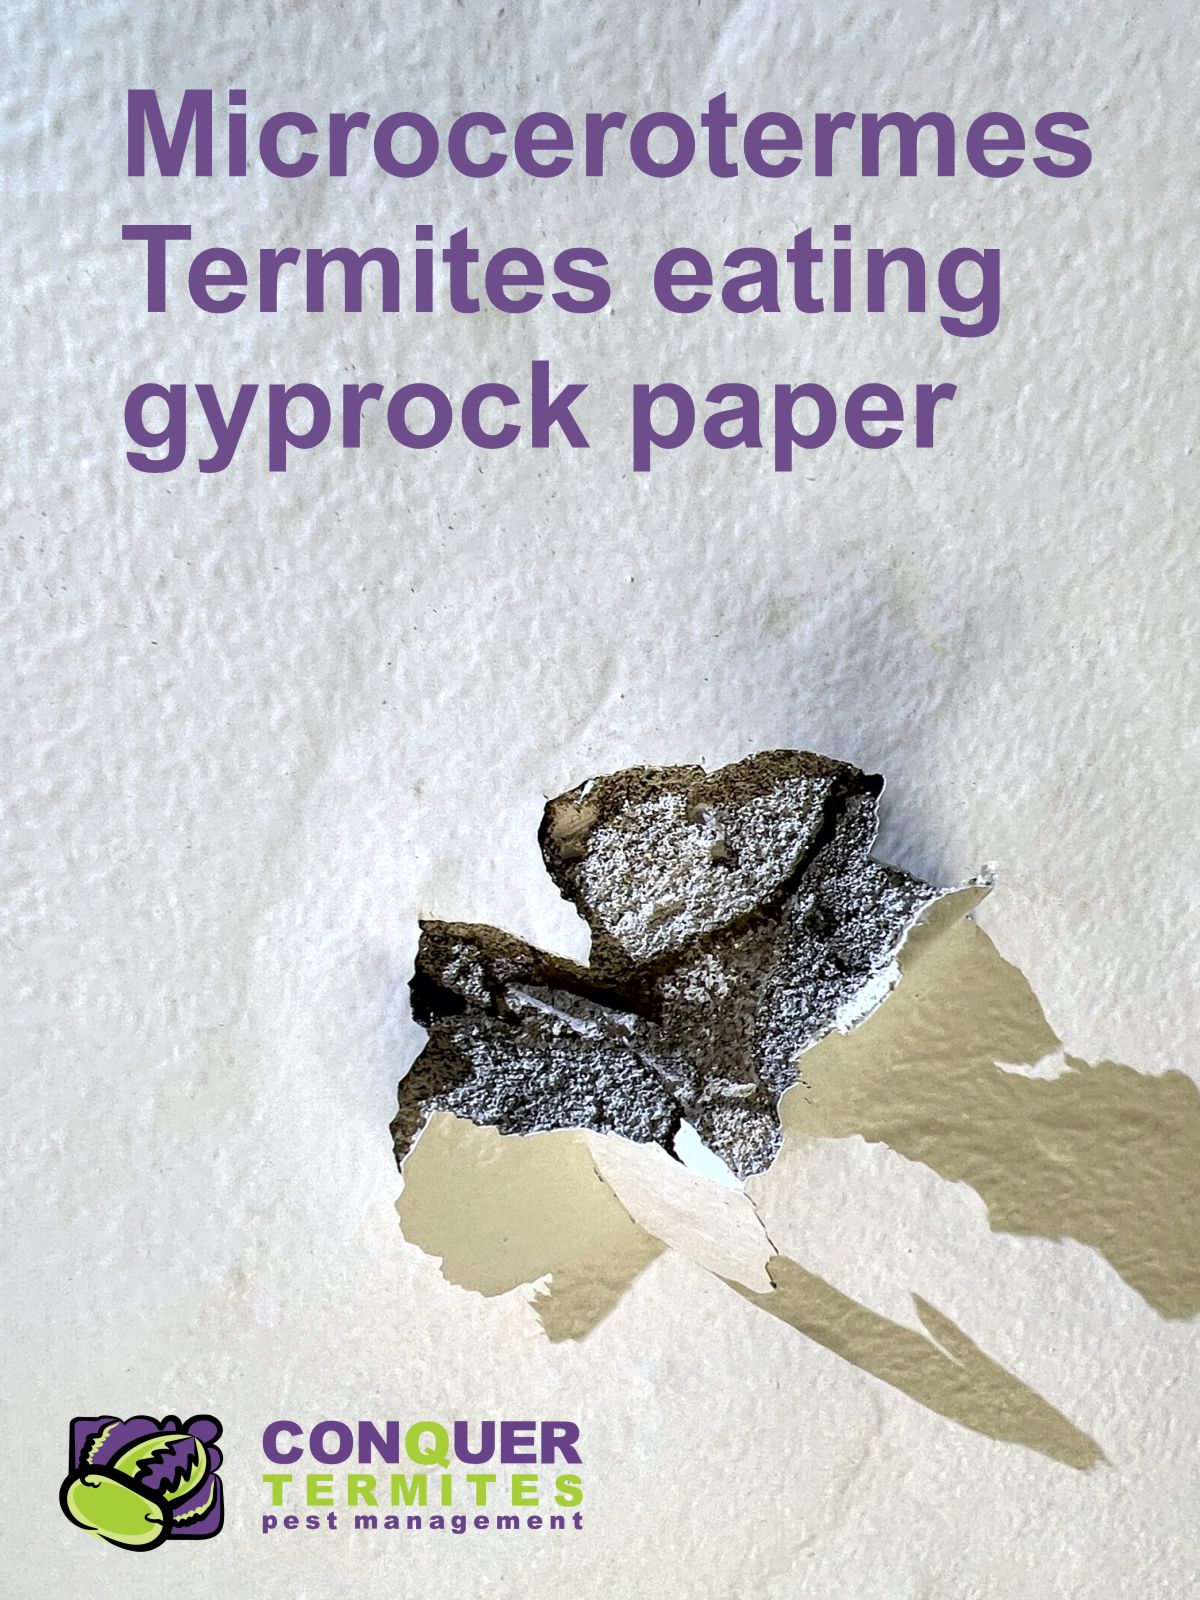 Microcerotermes in Gyprock eating paper